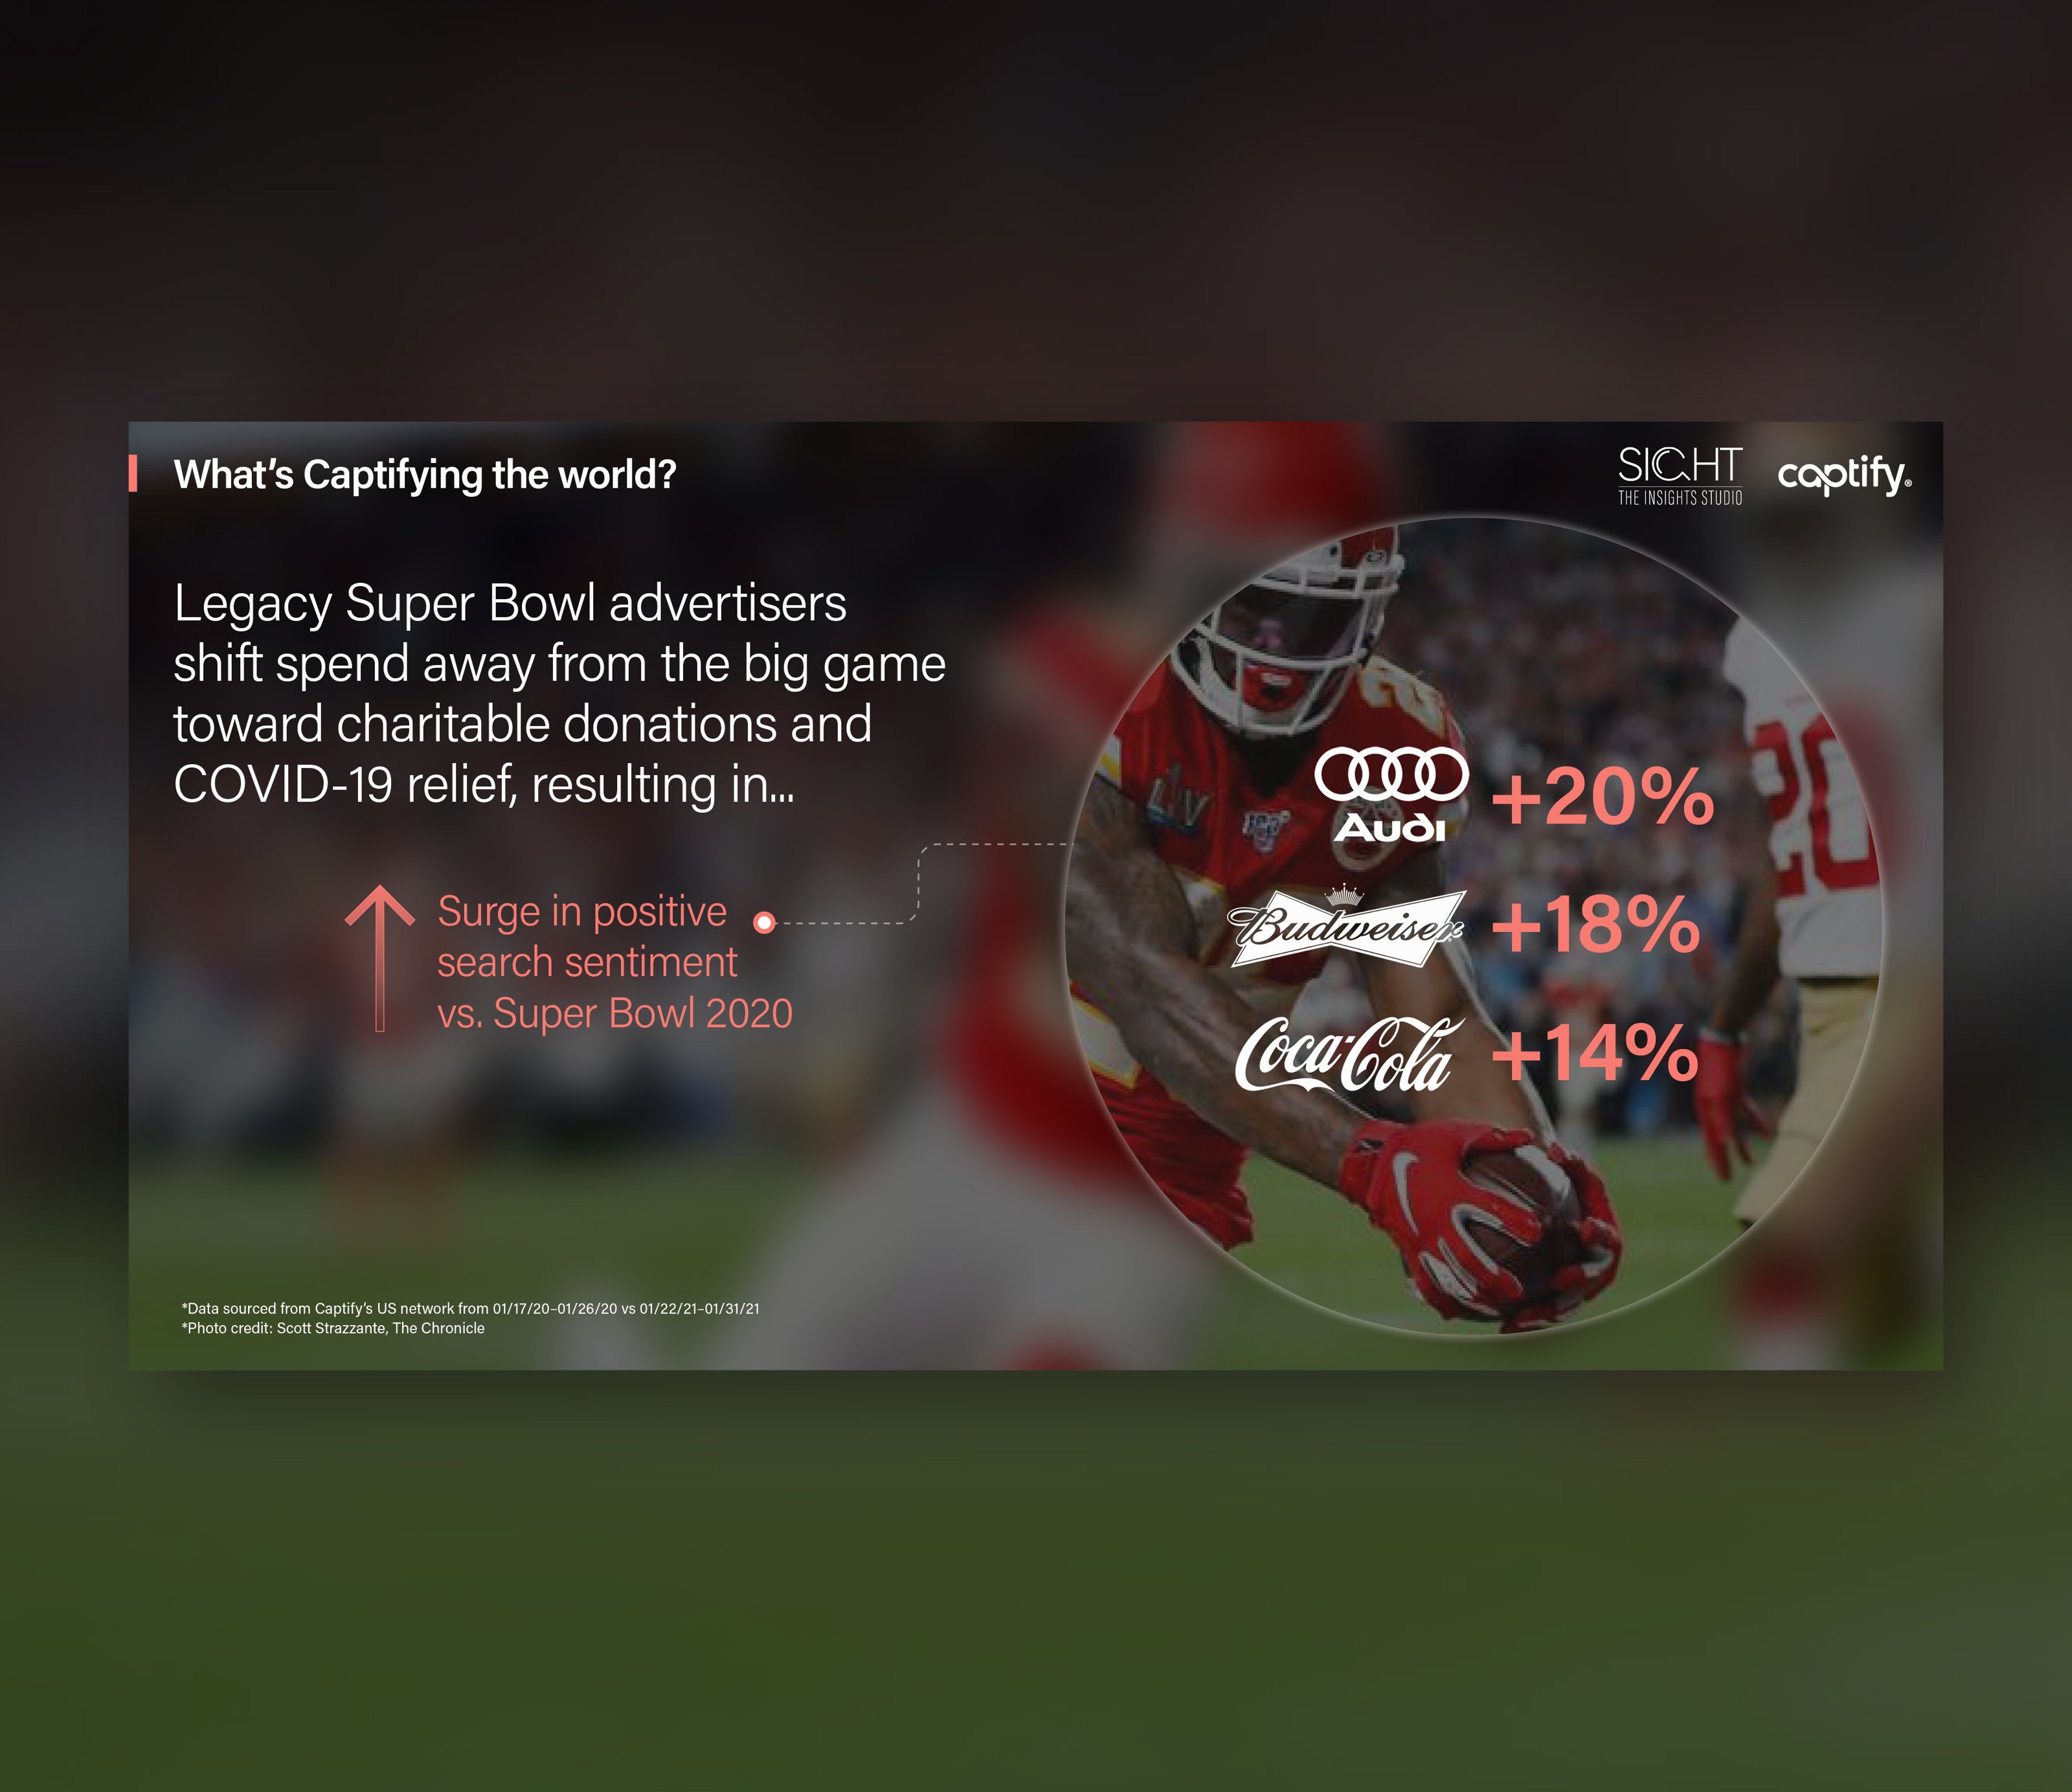 What’s Captifying the world: Legacy Super Bowl advertisers shift spend away from the big game toward charitable donations and Covid-19 relief, resulting in a surge in positive search sentiment